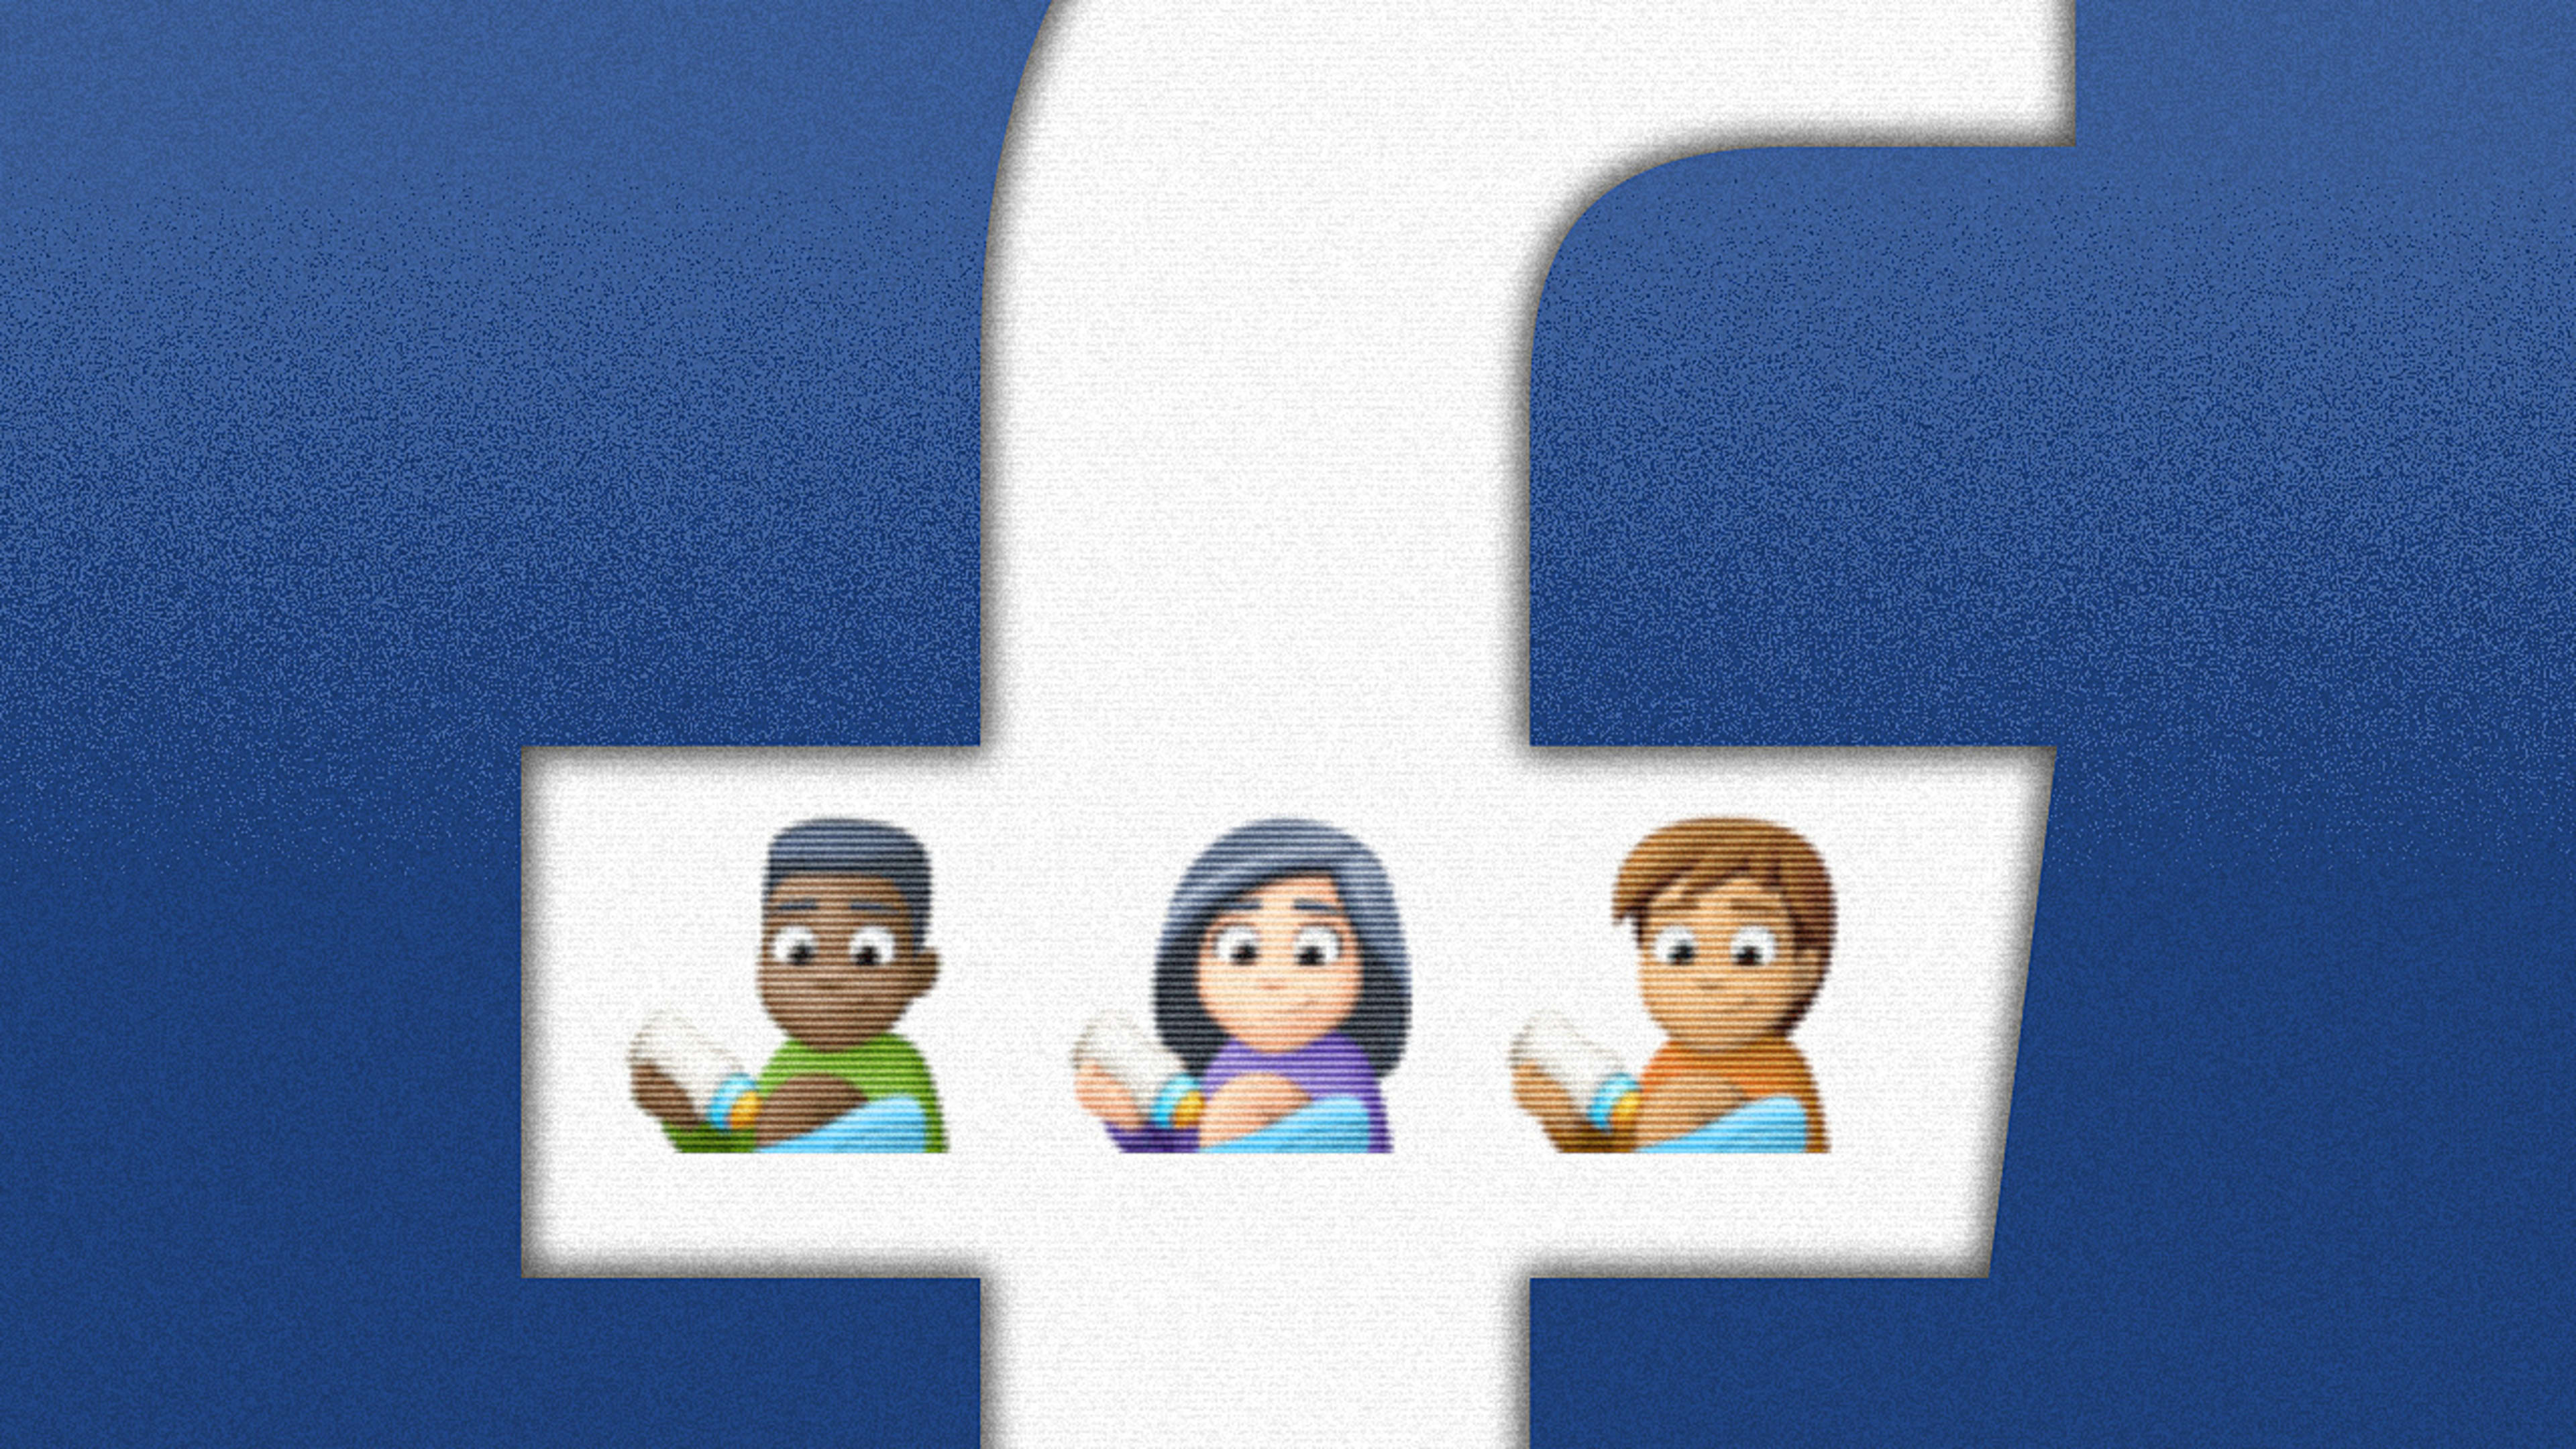 Facebook’s proposed emoji illustrates yet another glaring blind spot on race